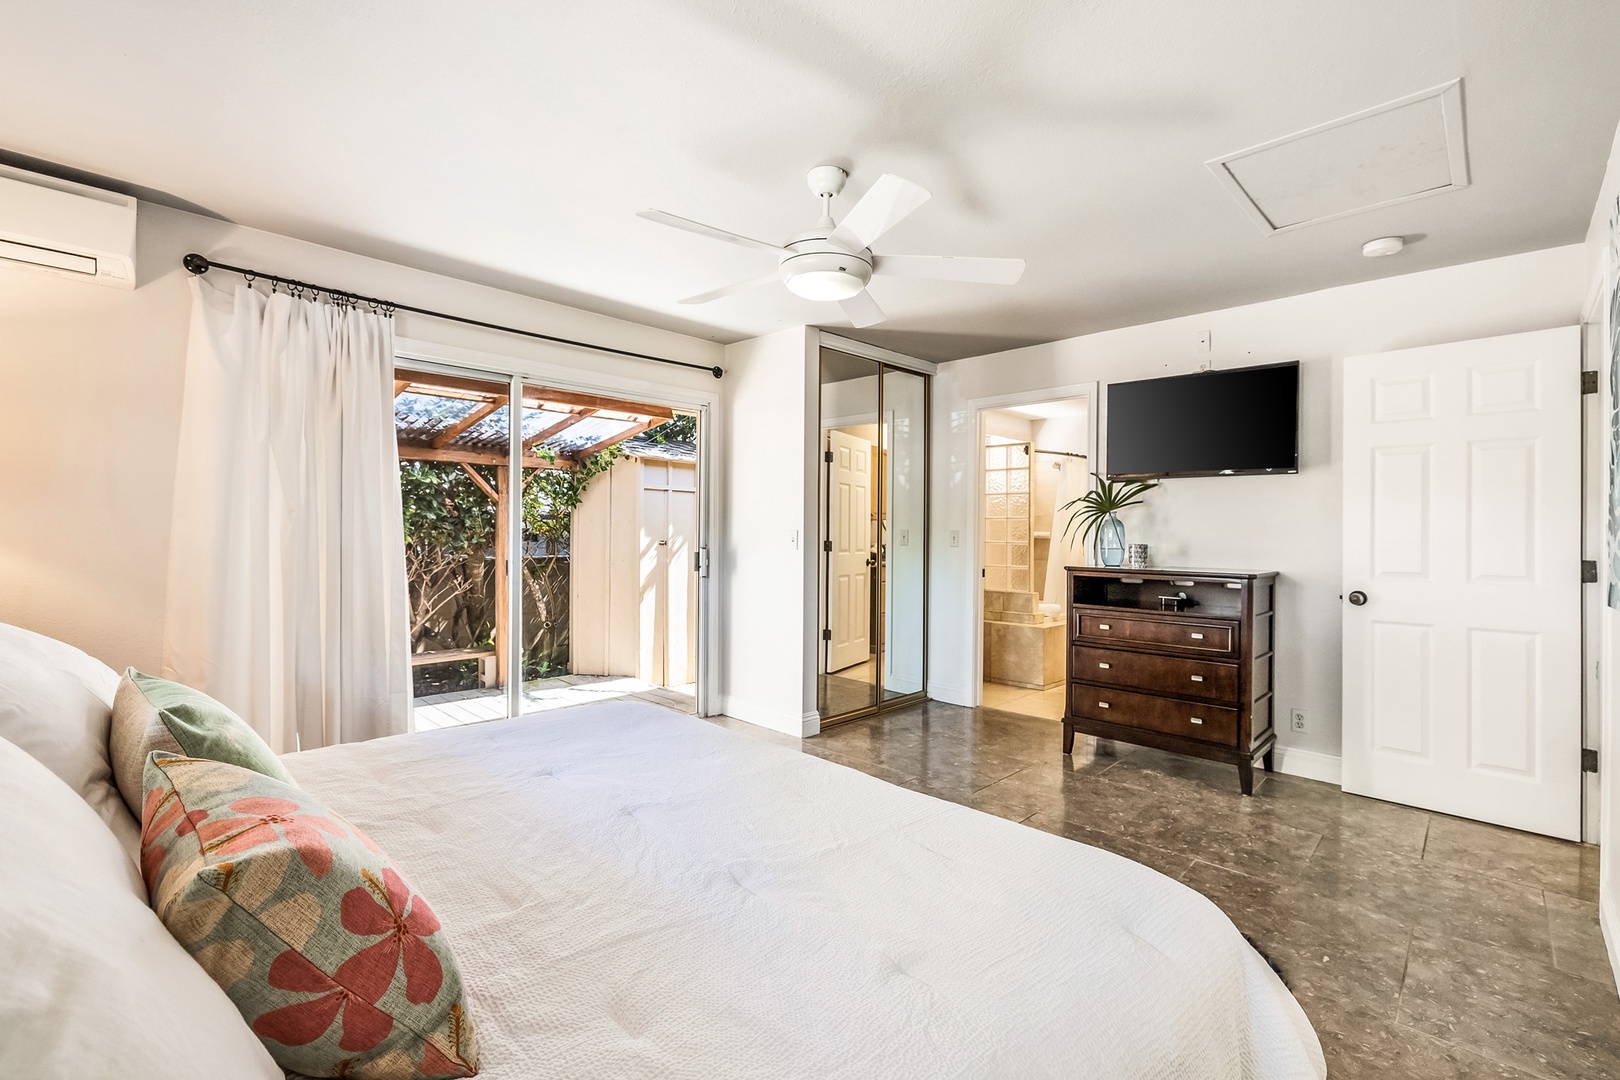 Honolulu Vacation Rentals, Hale Ho'omaha - Plus, there's a flat screen TV and ensuite full bath